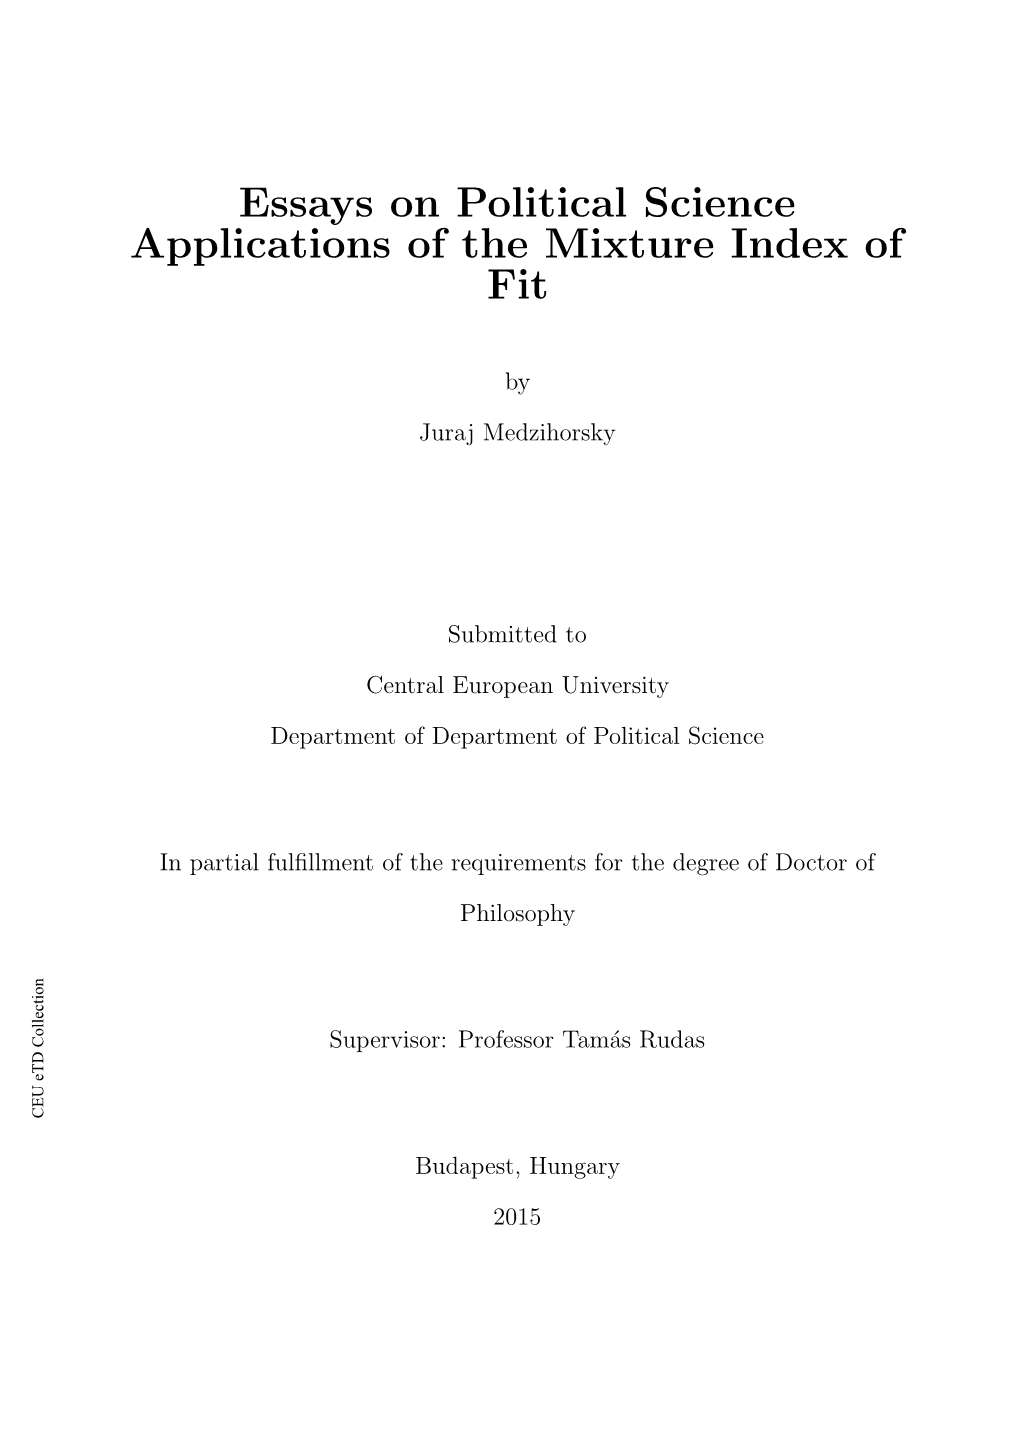 Essays on Political Science Applications of the Mixture Index of Fit